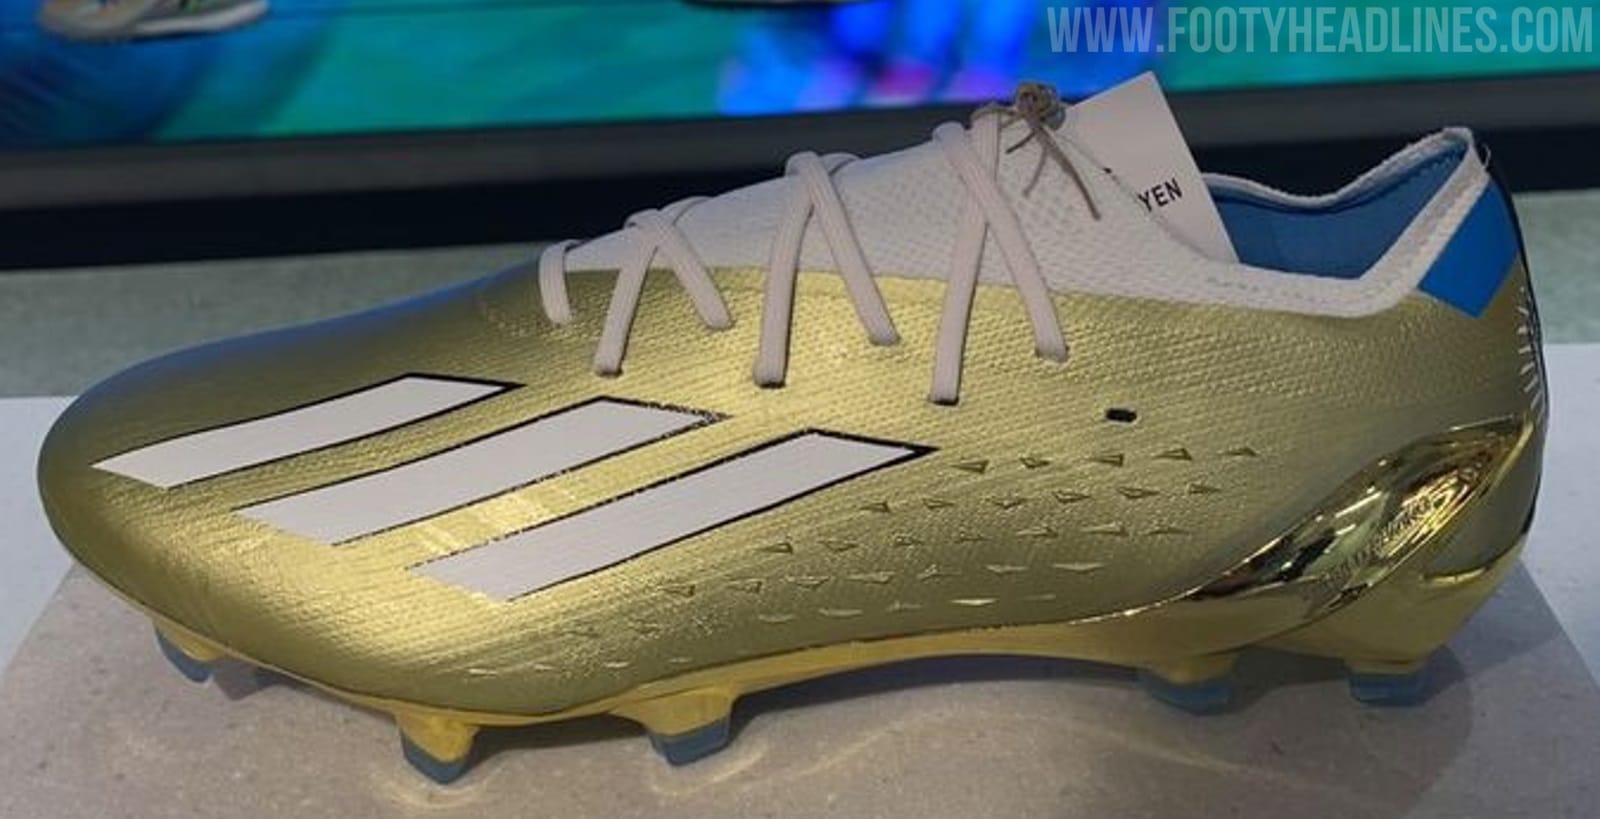 Lionel Messi's World Cup Boots Lionel Messi's boots from Adidas for